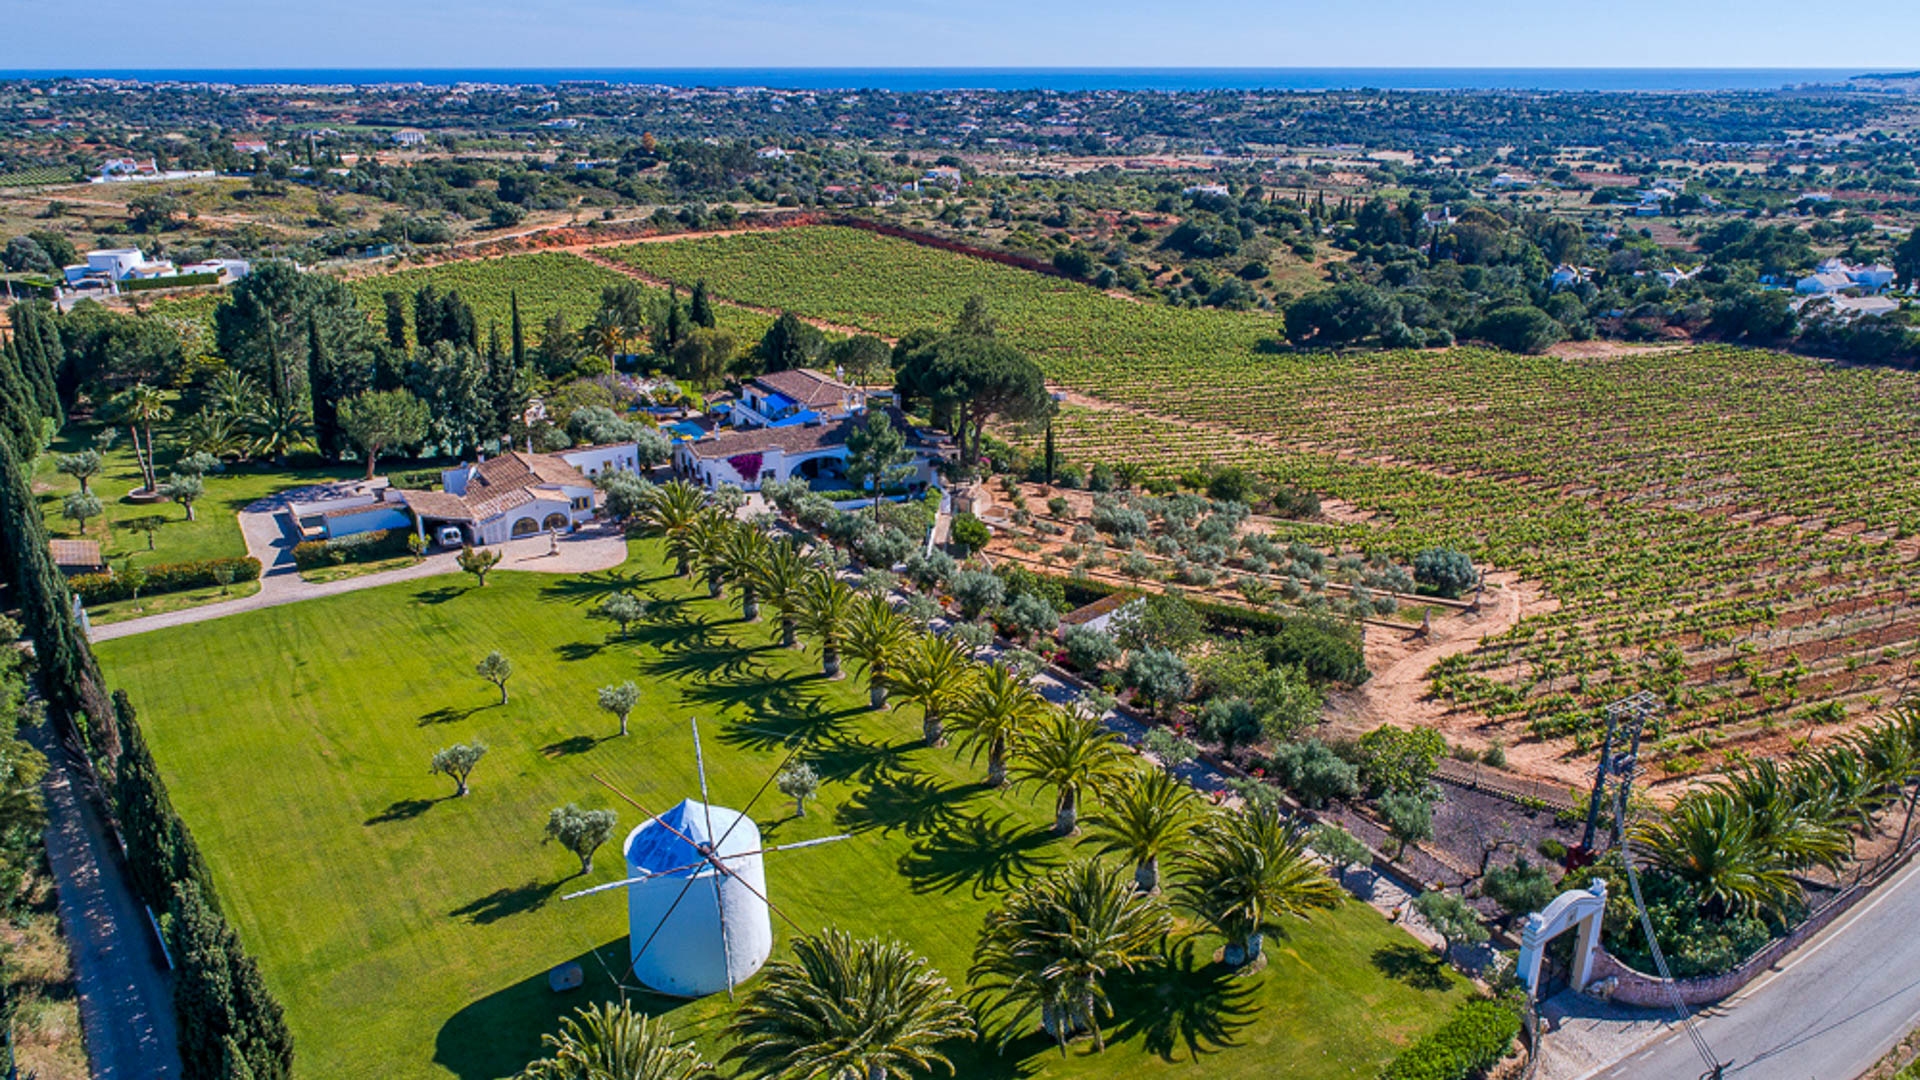 SOLD MARCH 2023 - Majestic Country Estate set in 11.7ha of Vineyards, Guia | VM1966 A magical retreat set within 11.7 hectares of vineyard and stunning Mediterranean gardens. Business opportunity to create a boutique hotel or enjoy a large family home close to beaches and amenities